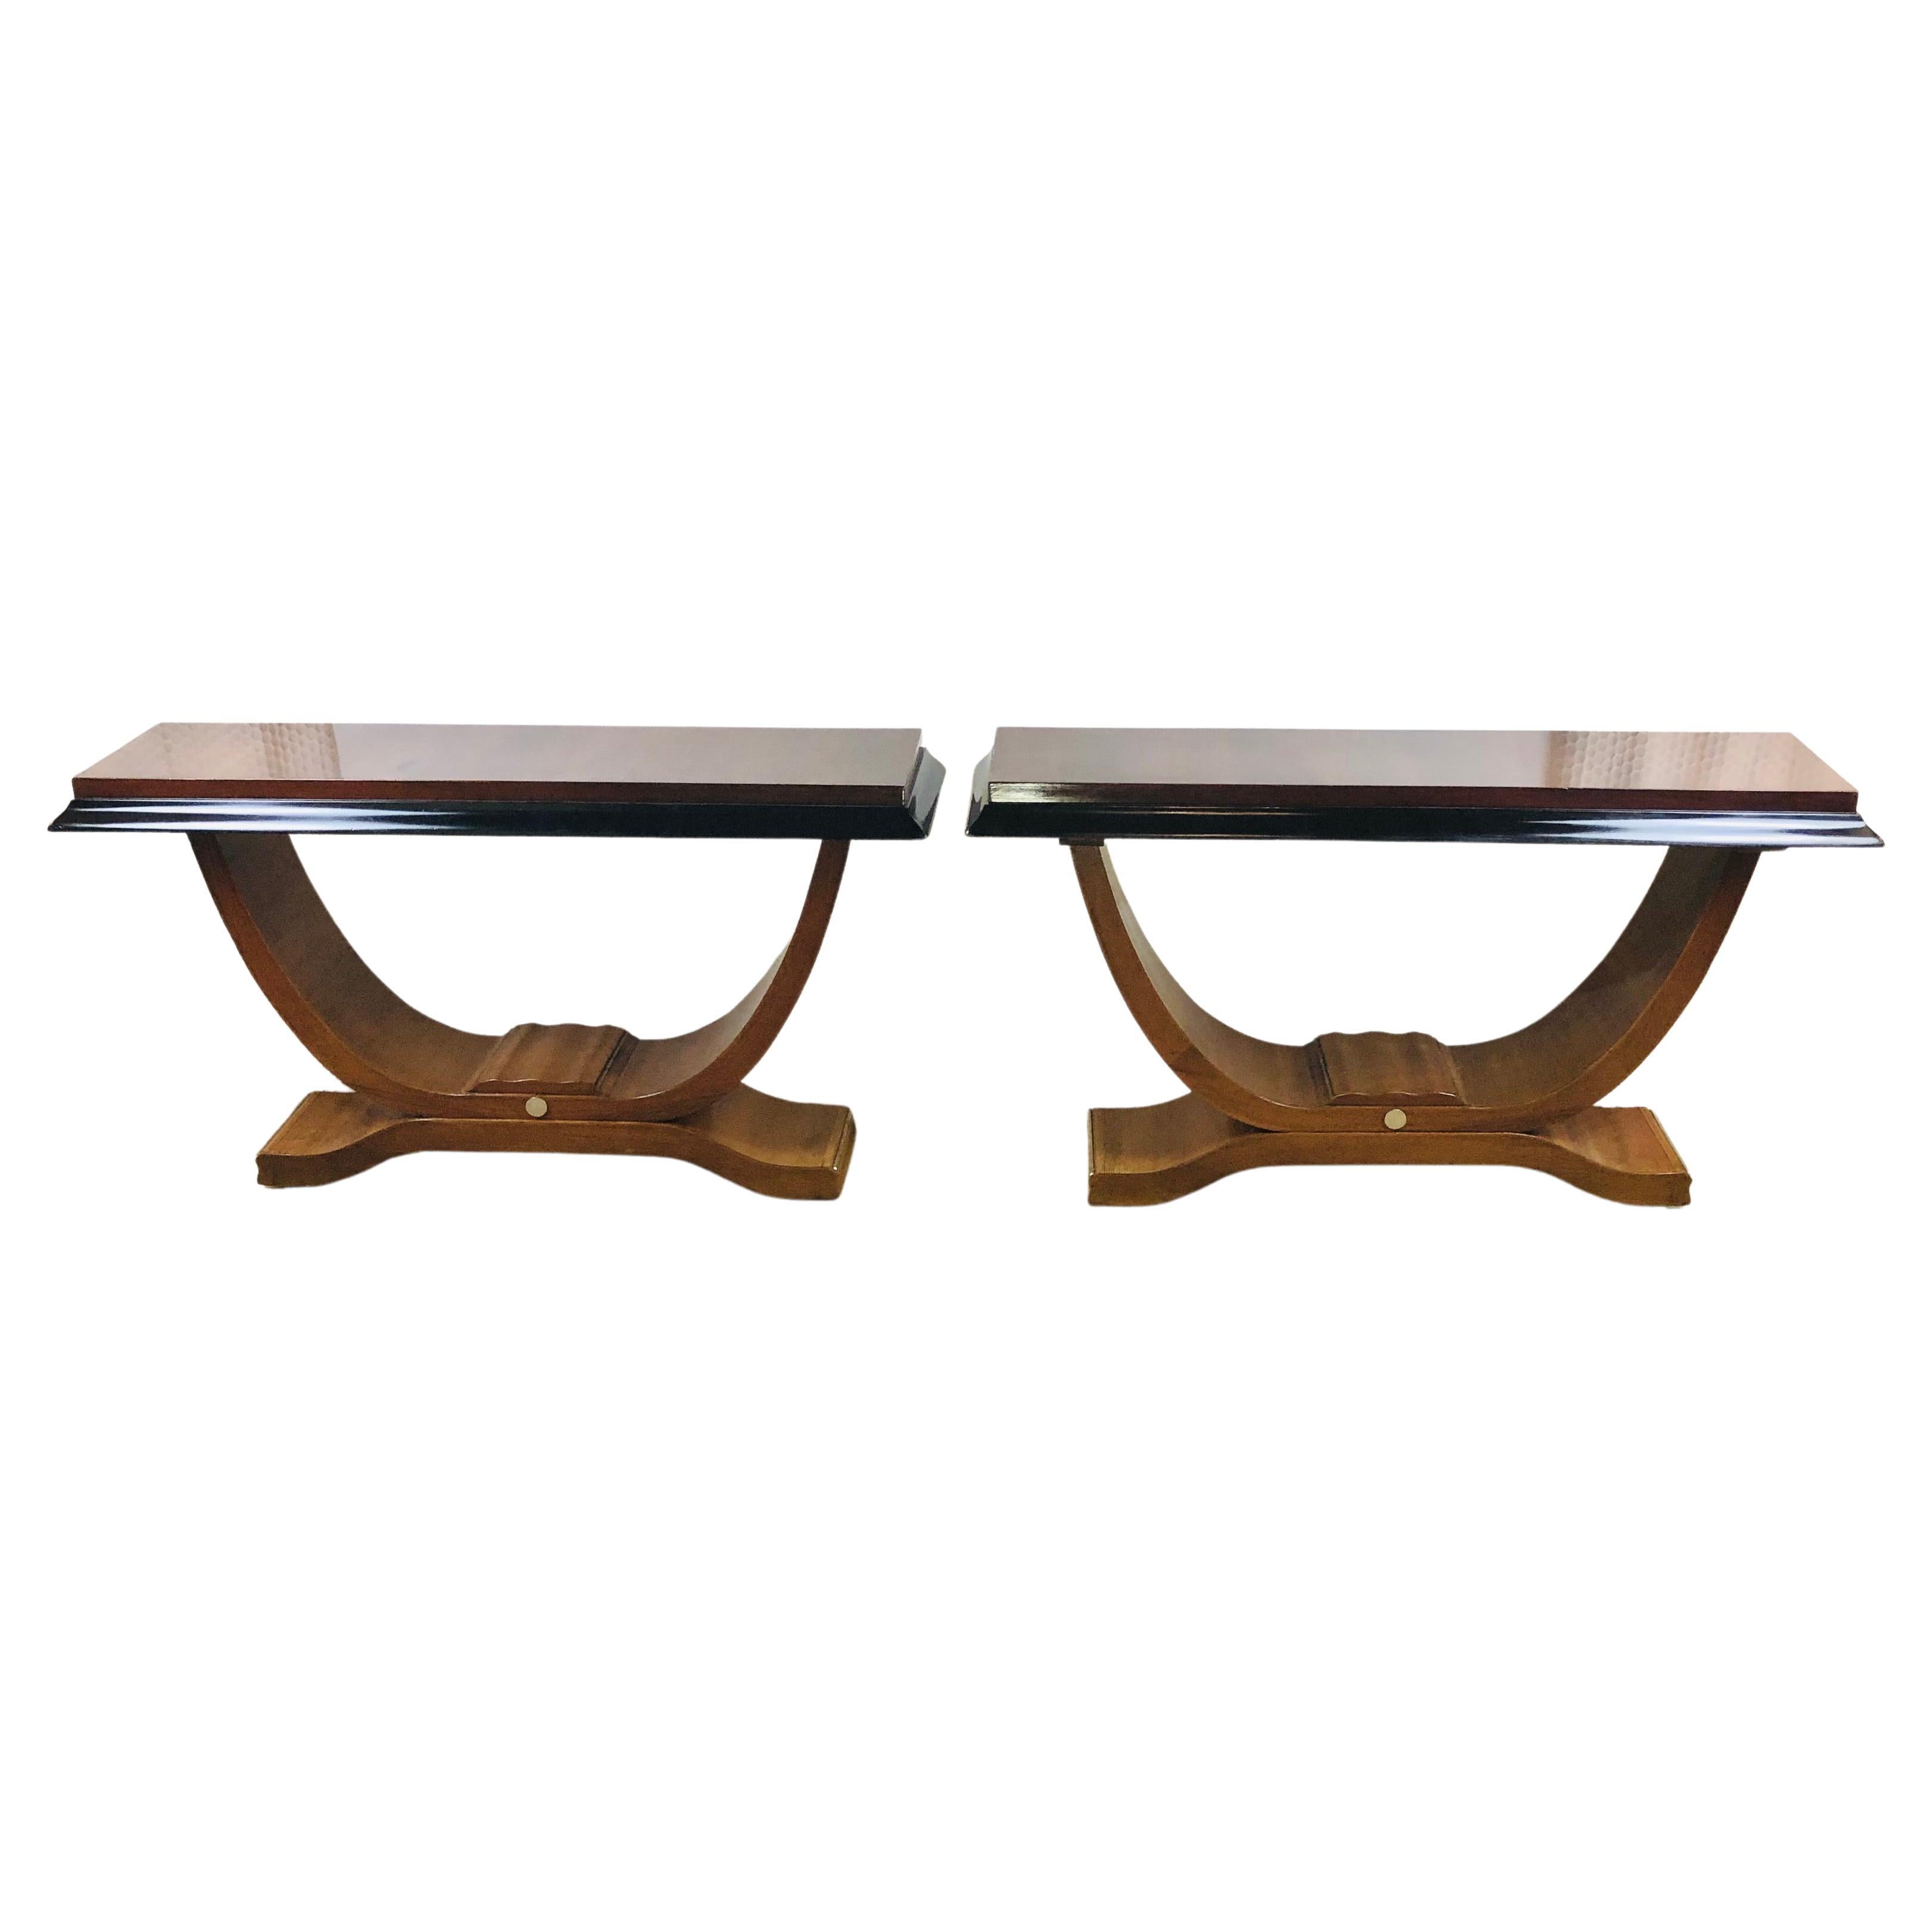 Two French Art Deco Console Tables Nickeled Trim attrib. Alfred Porteneuve